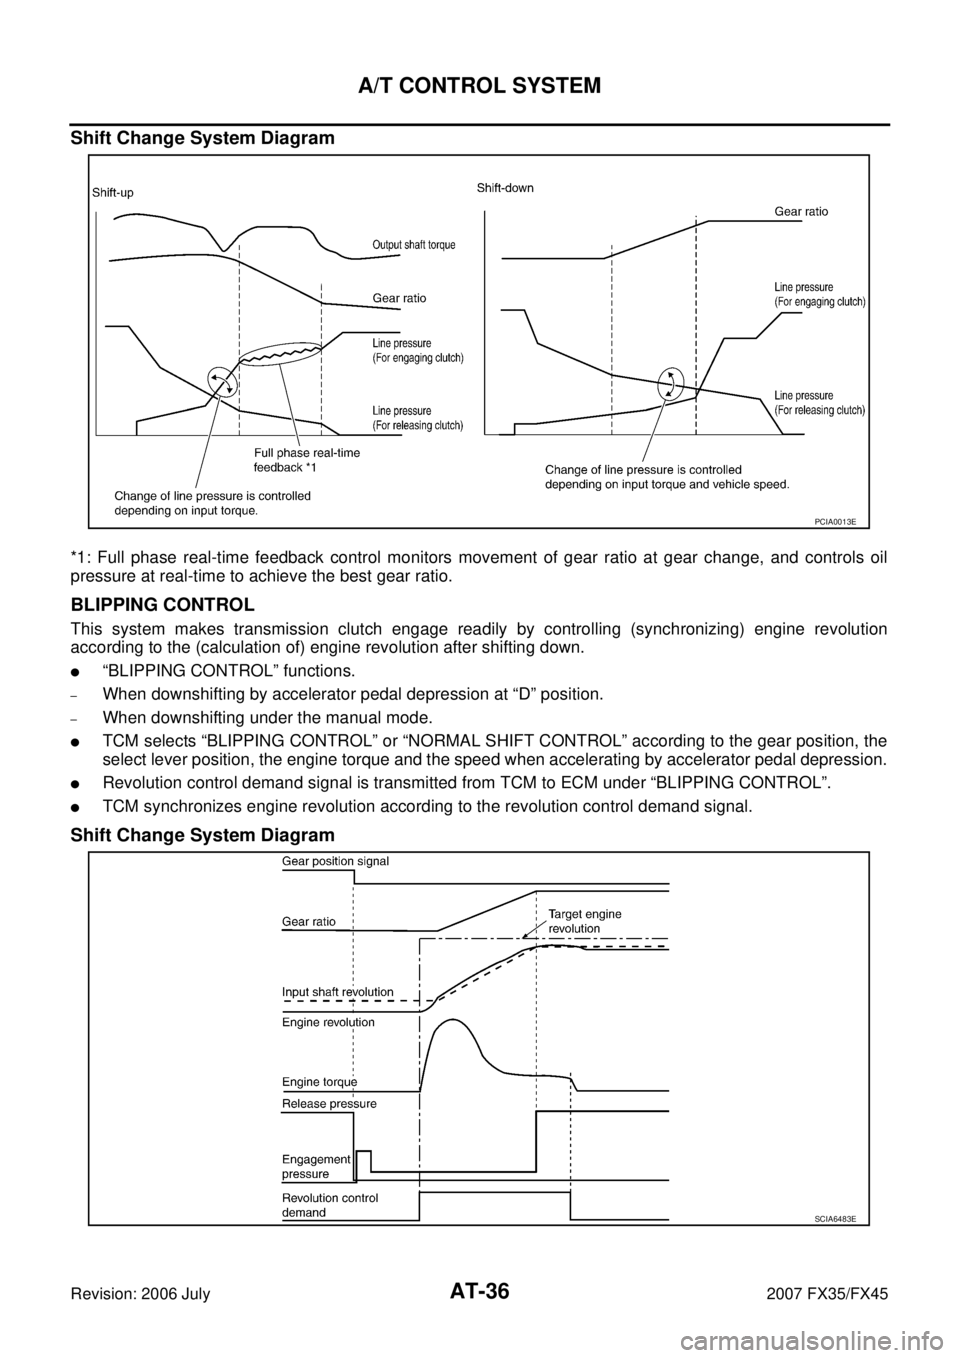 INFINITI FX35 2007  Service Manual AT-36
A/T CONTROL SYSTEM
Revision: 2006 July 2007 FX35/FX45
Shift Change System Diagram
*1: Full phase real-time feedback control monitors movement of gear ratio at gear change, and controls oil 
pres